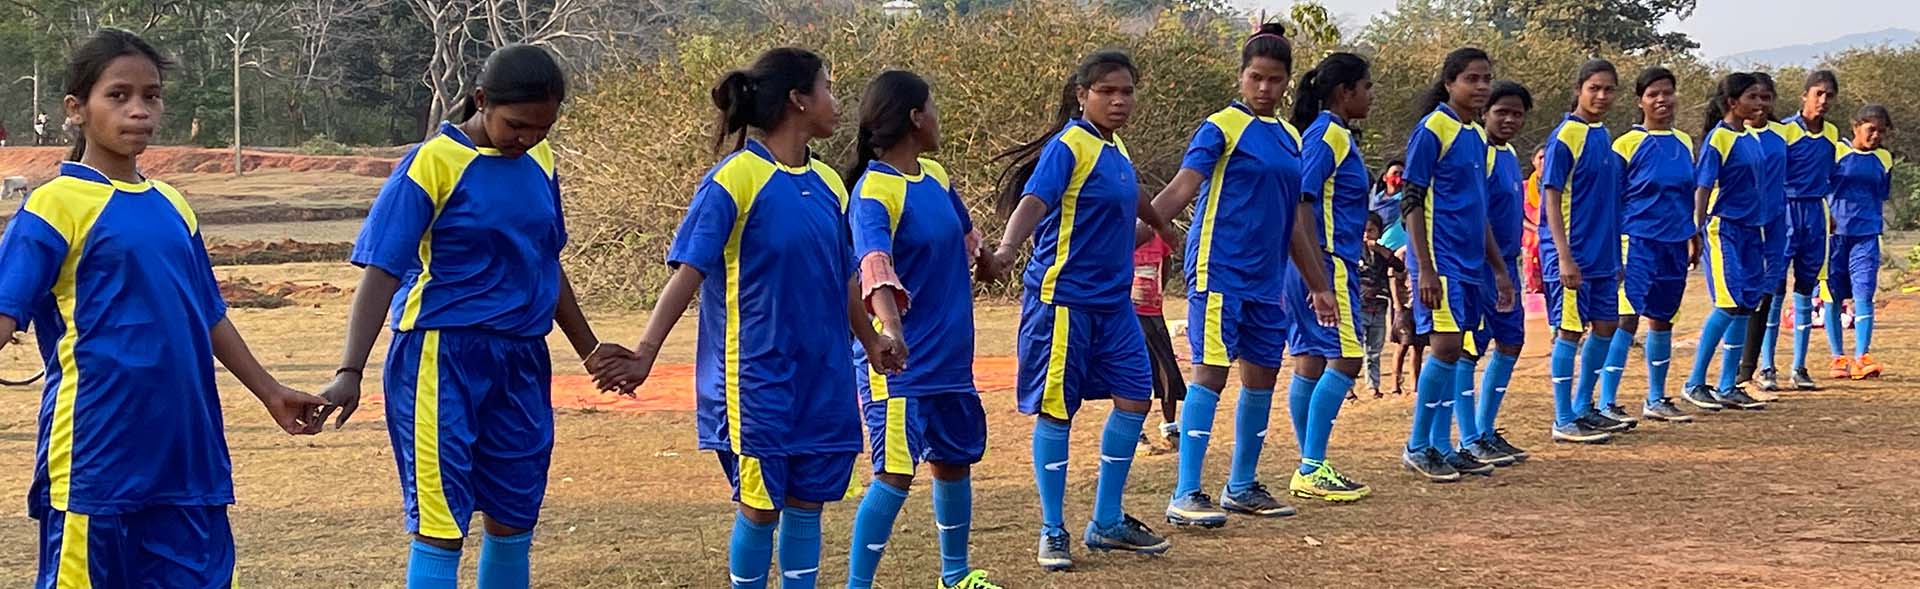 Two sisters in odisha overcome discrimination and exclusion to play football